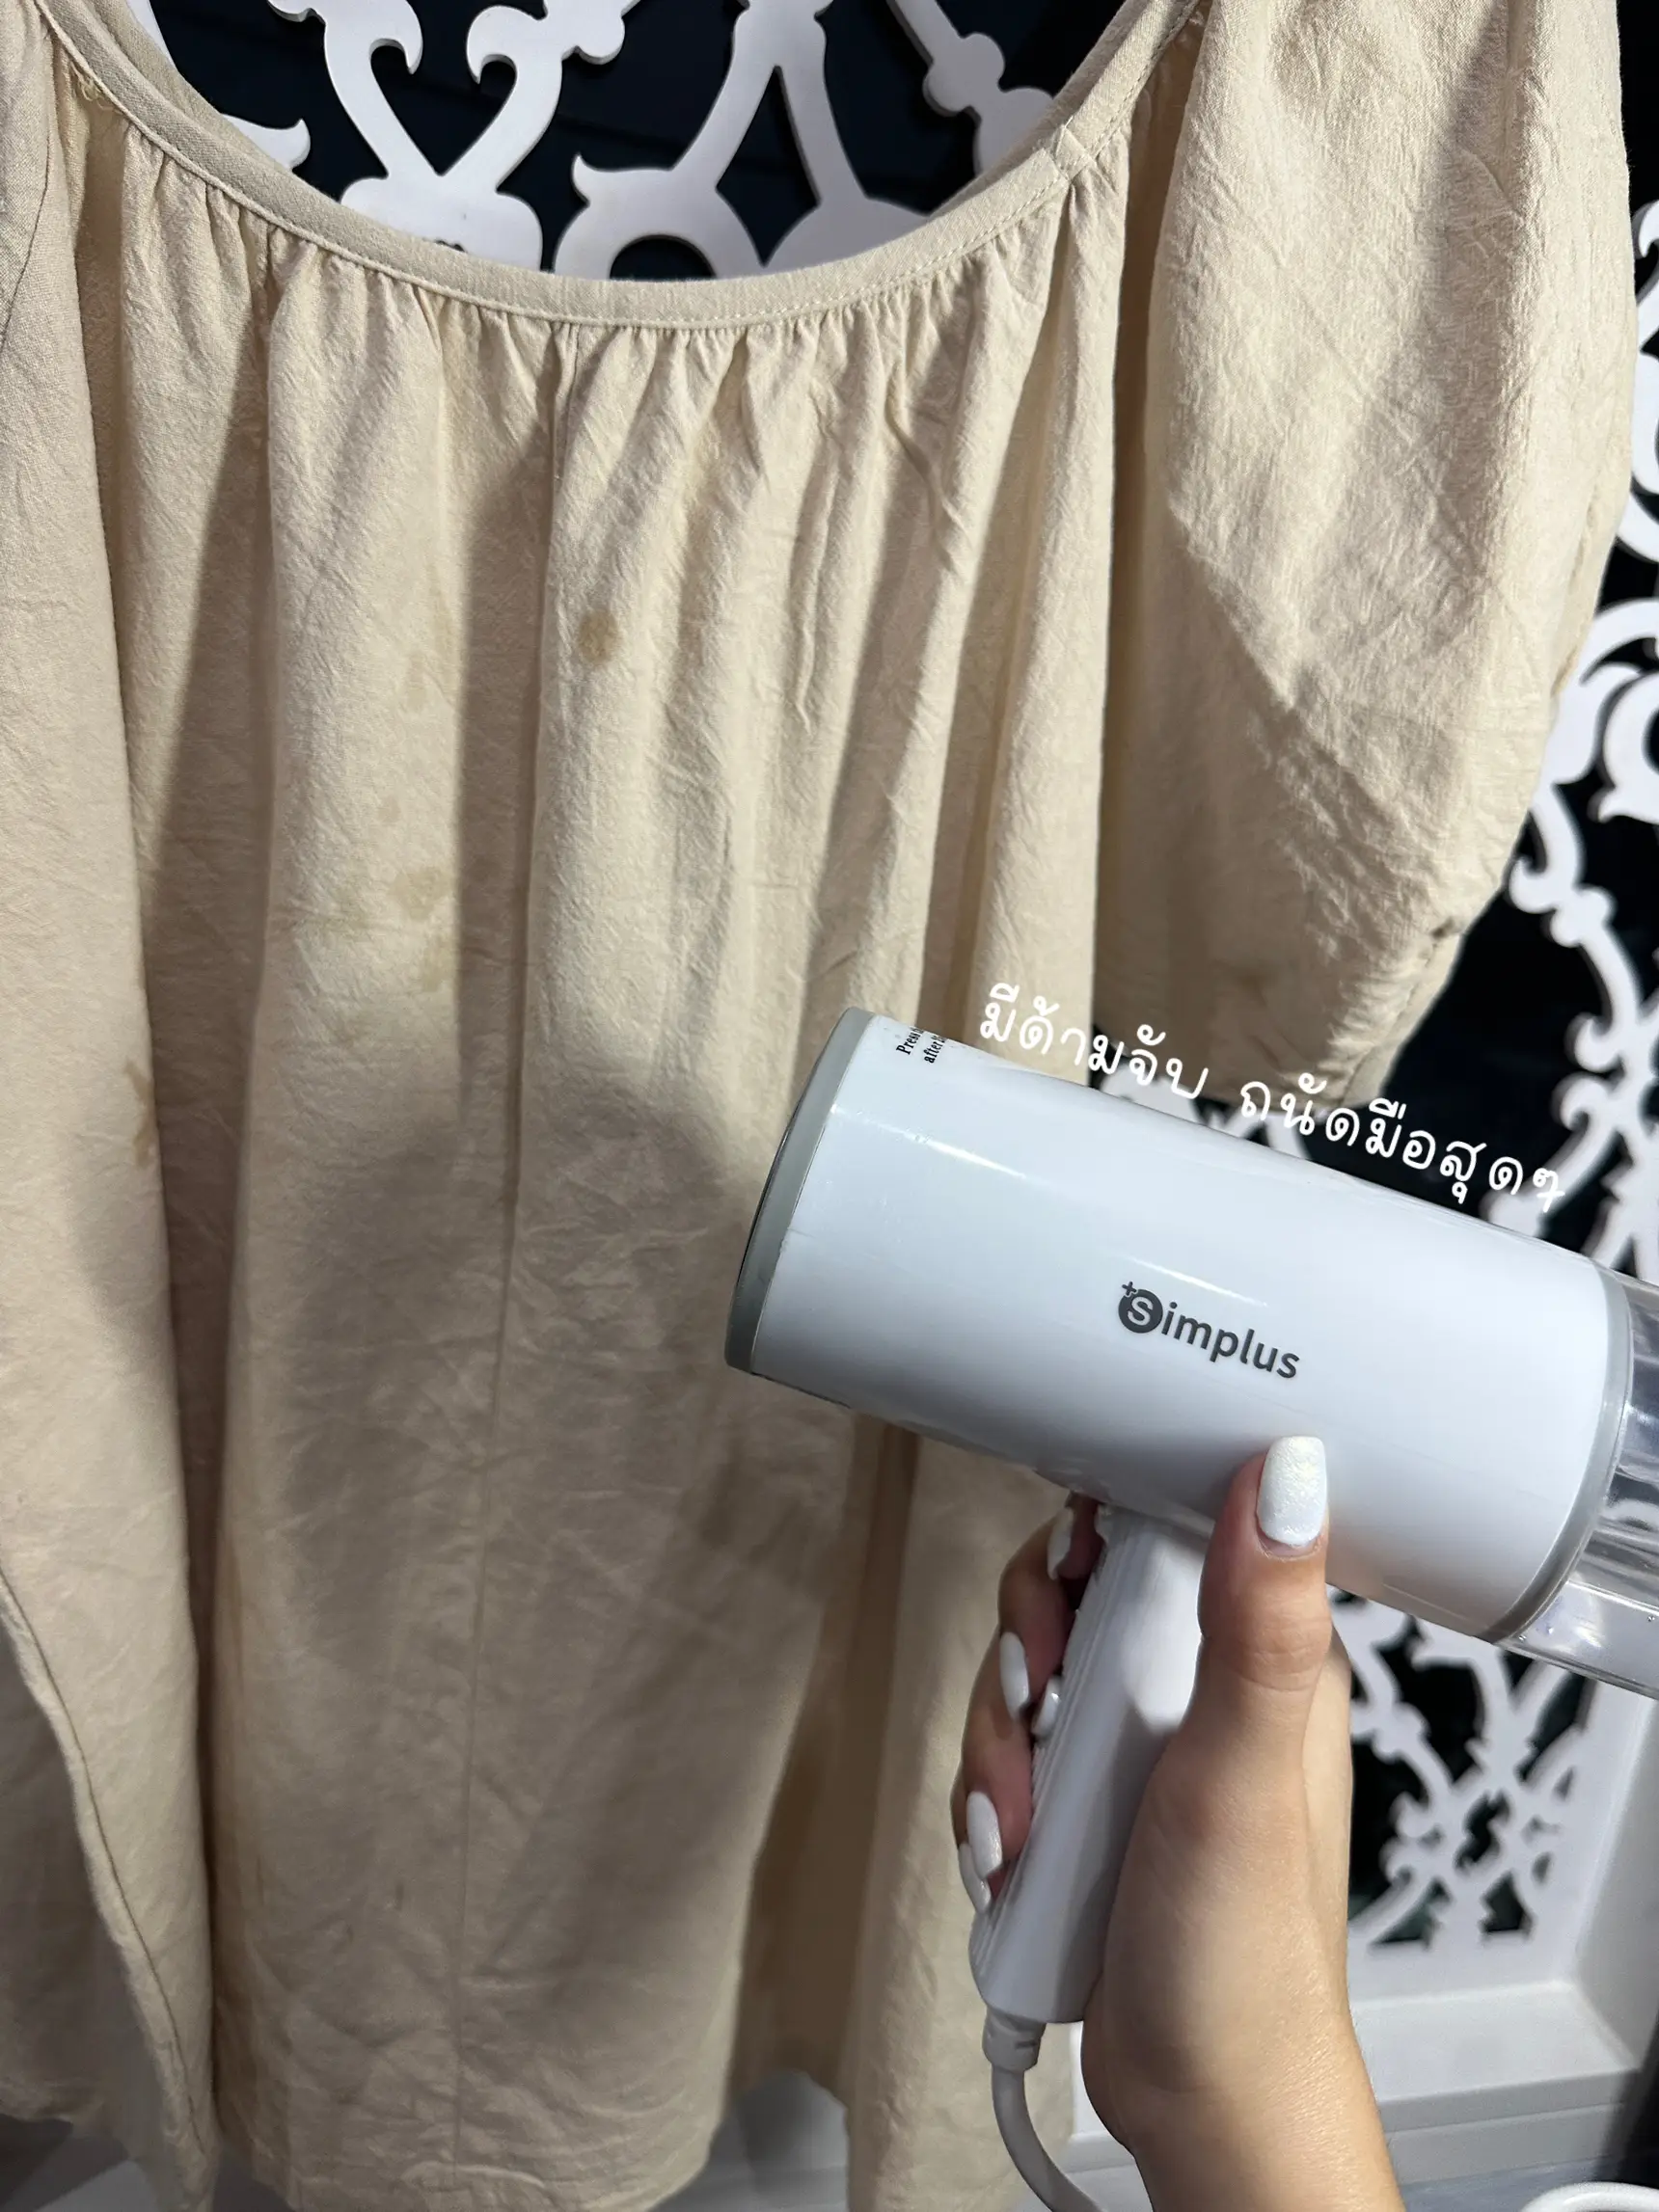 mycityapartment How sleek is this small portable dryer 🤩. As you